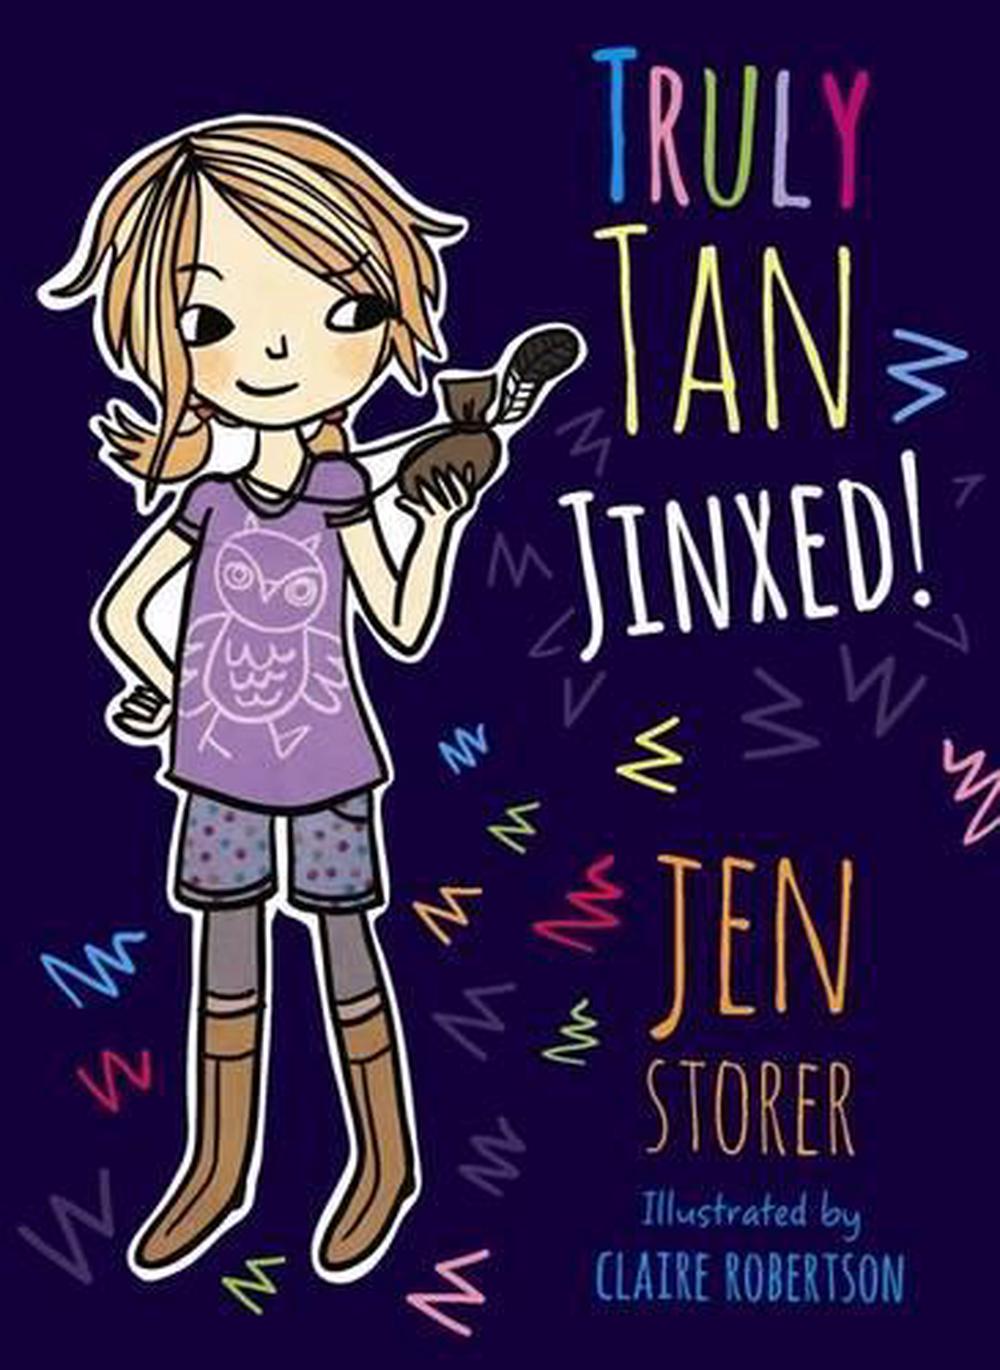 jinxed book 3 amy mcculloch